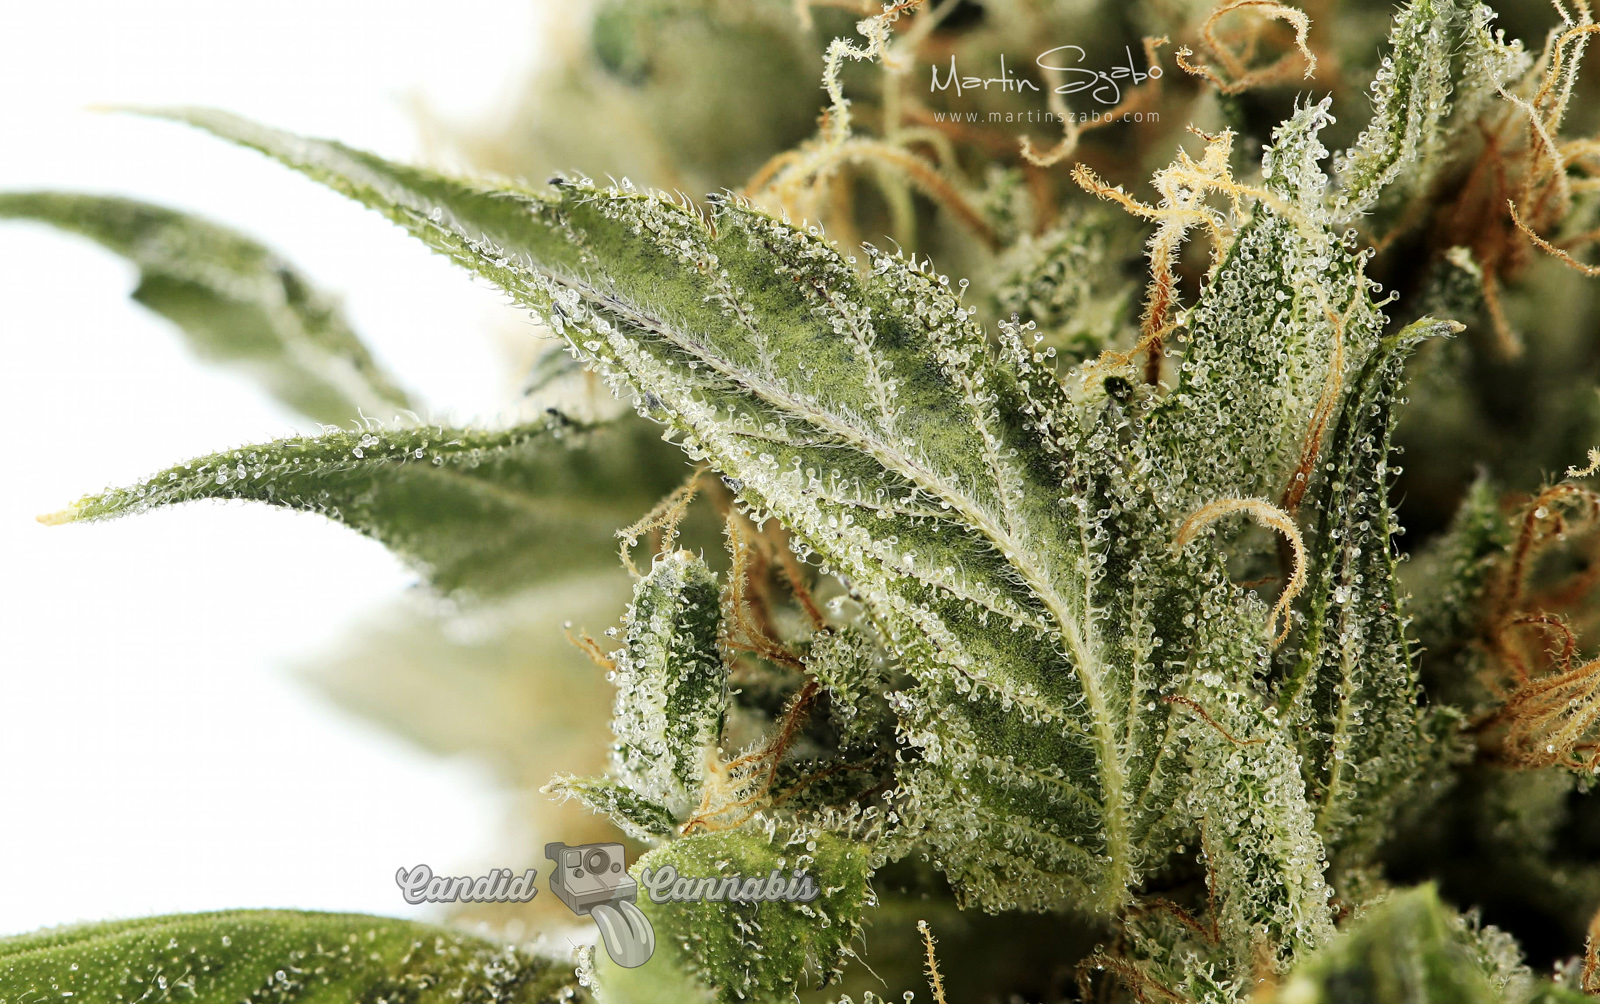 15_Cannabis-super-close-up-of-trichomes-lindsey-1